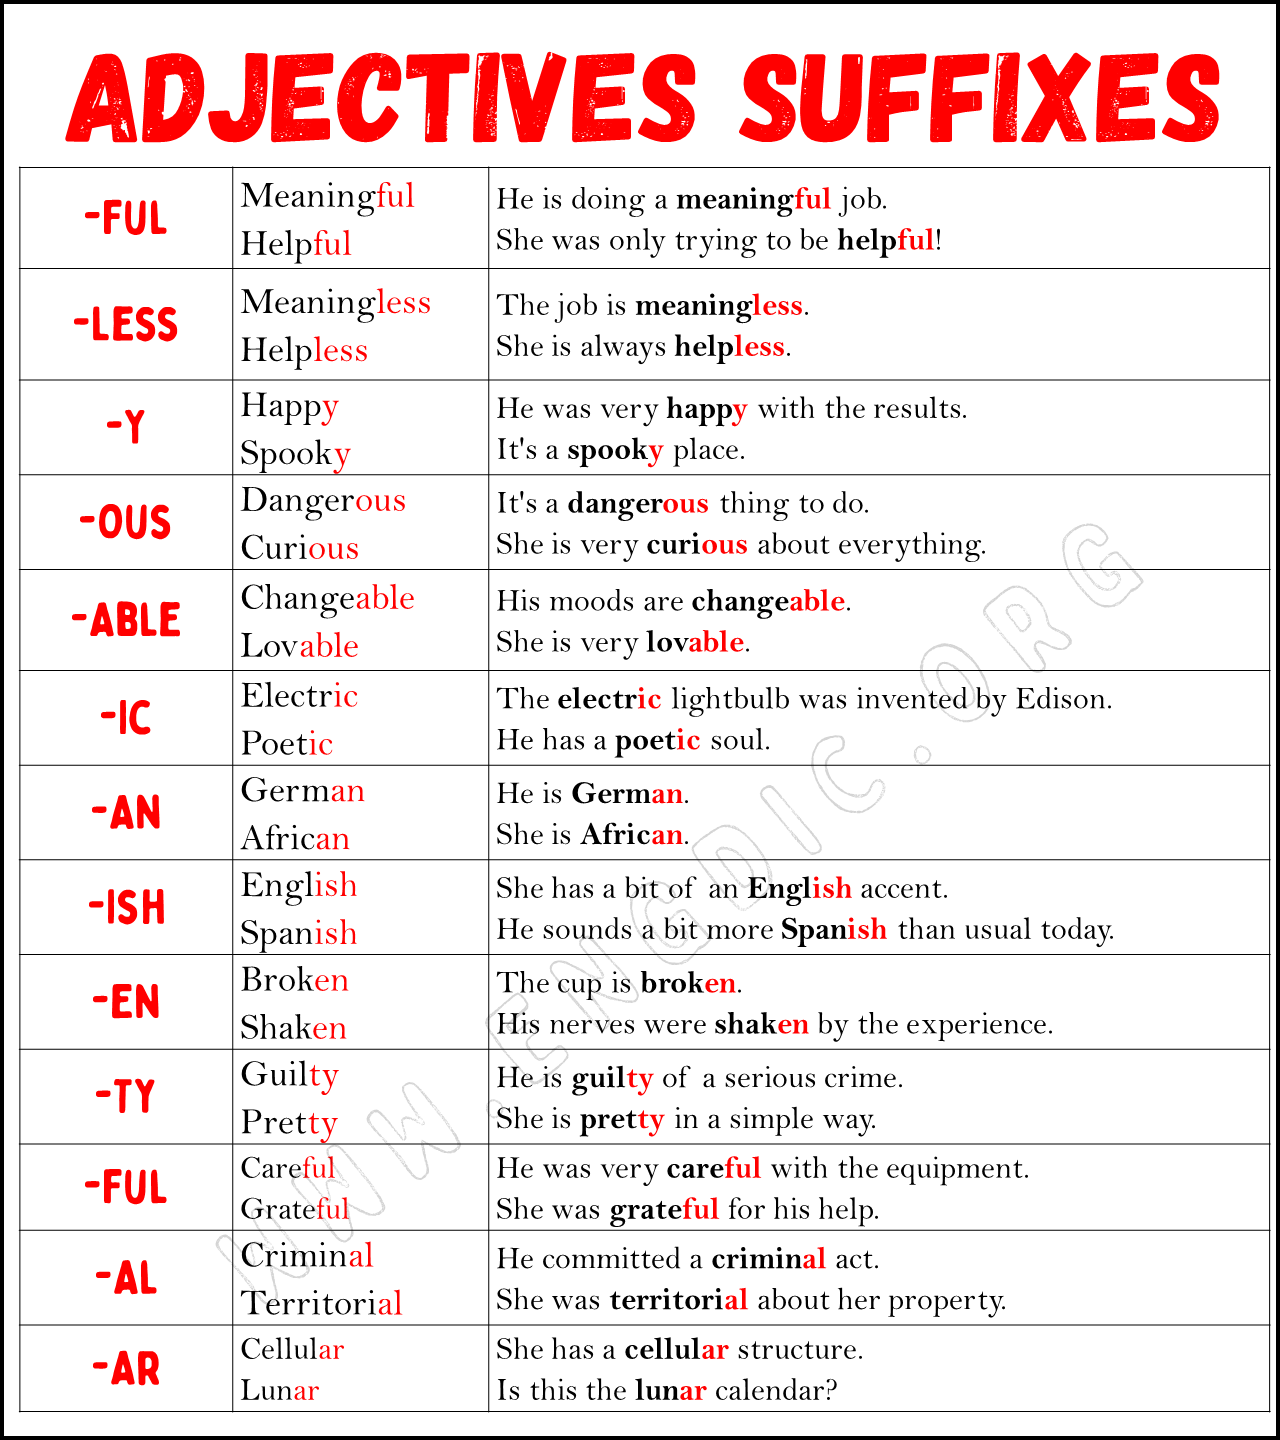 Adjectives Suffixes